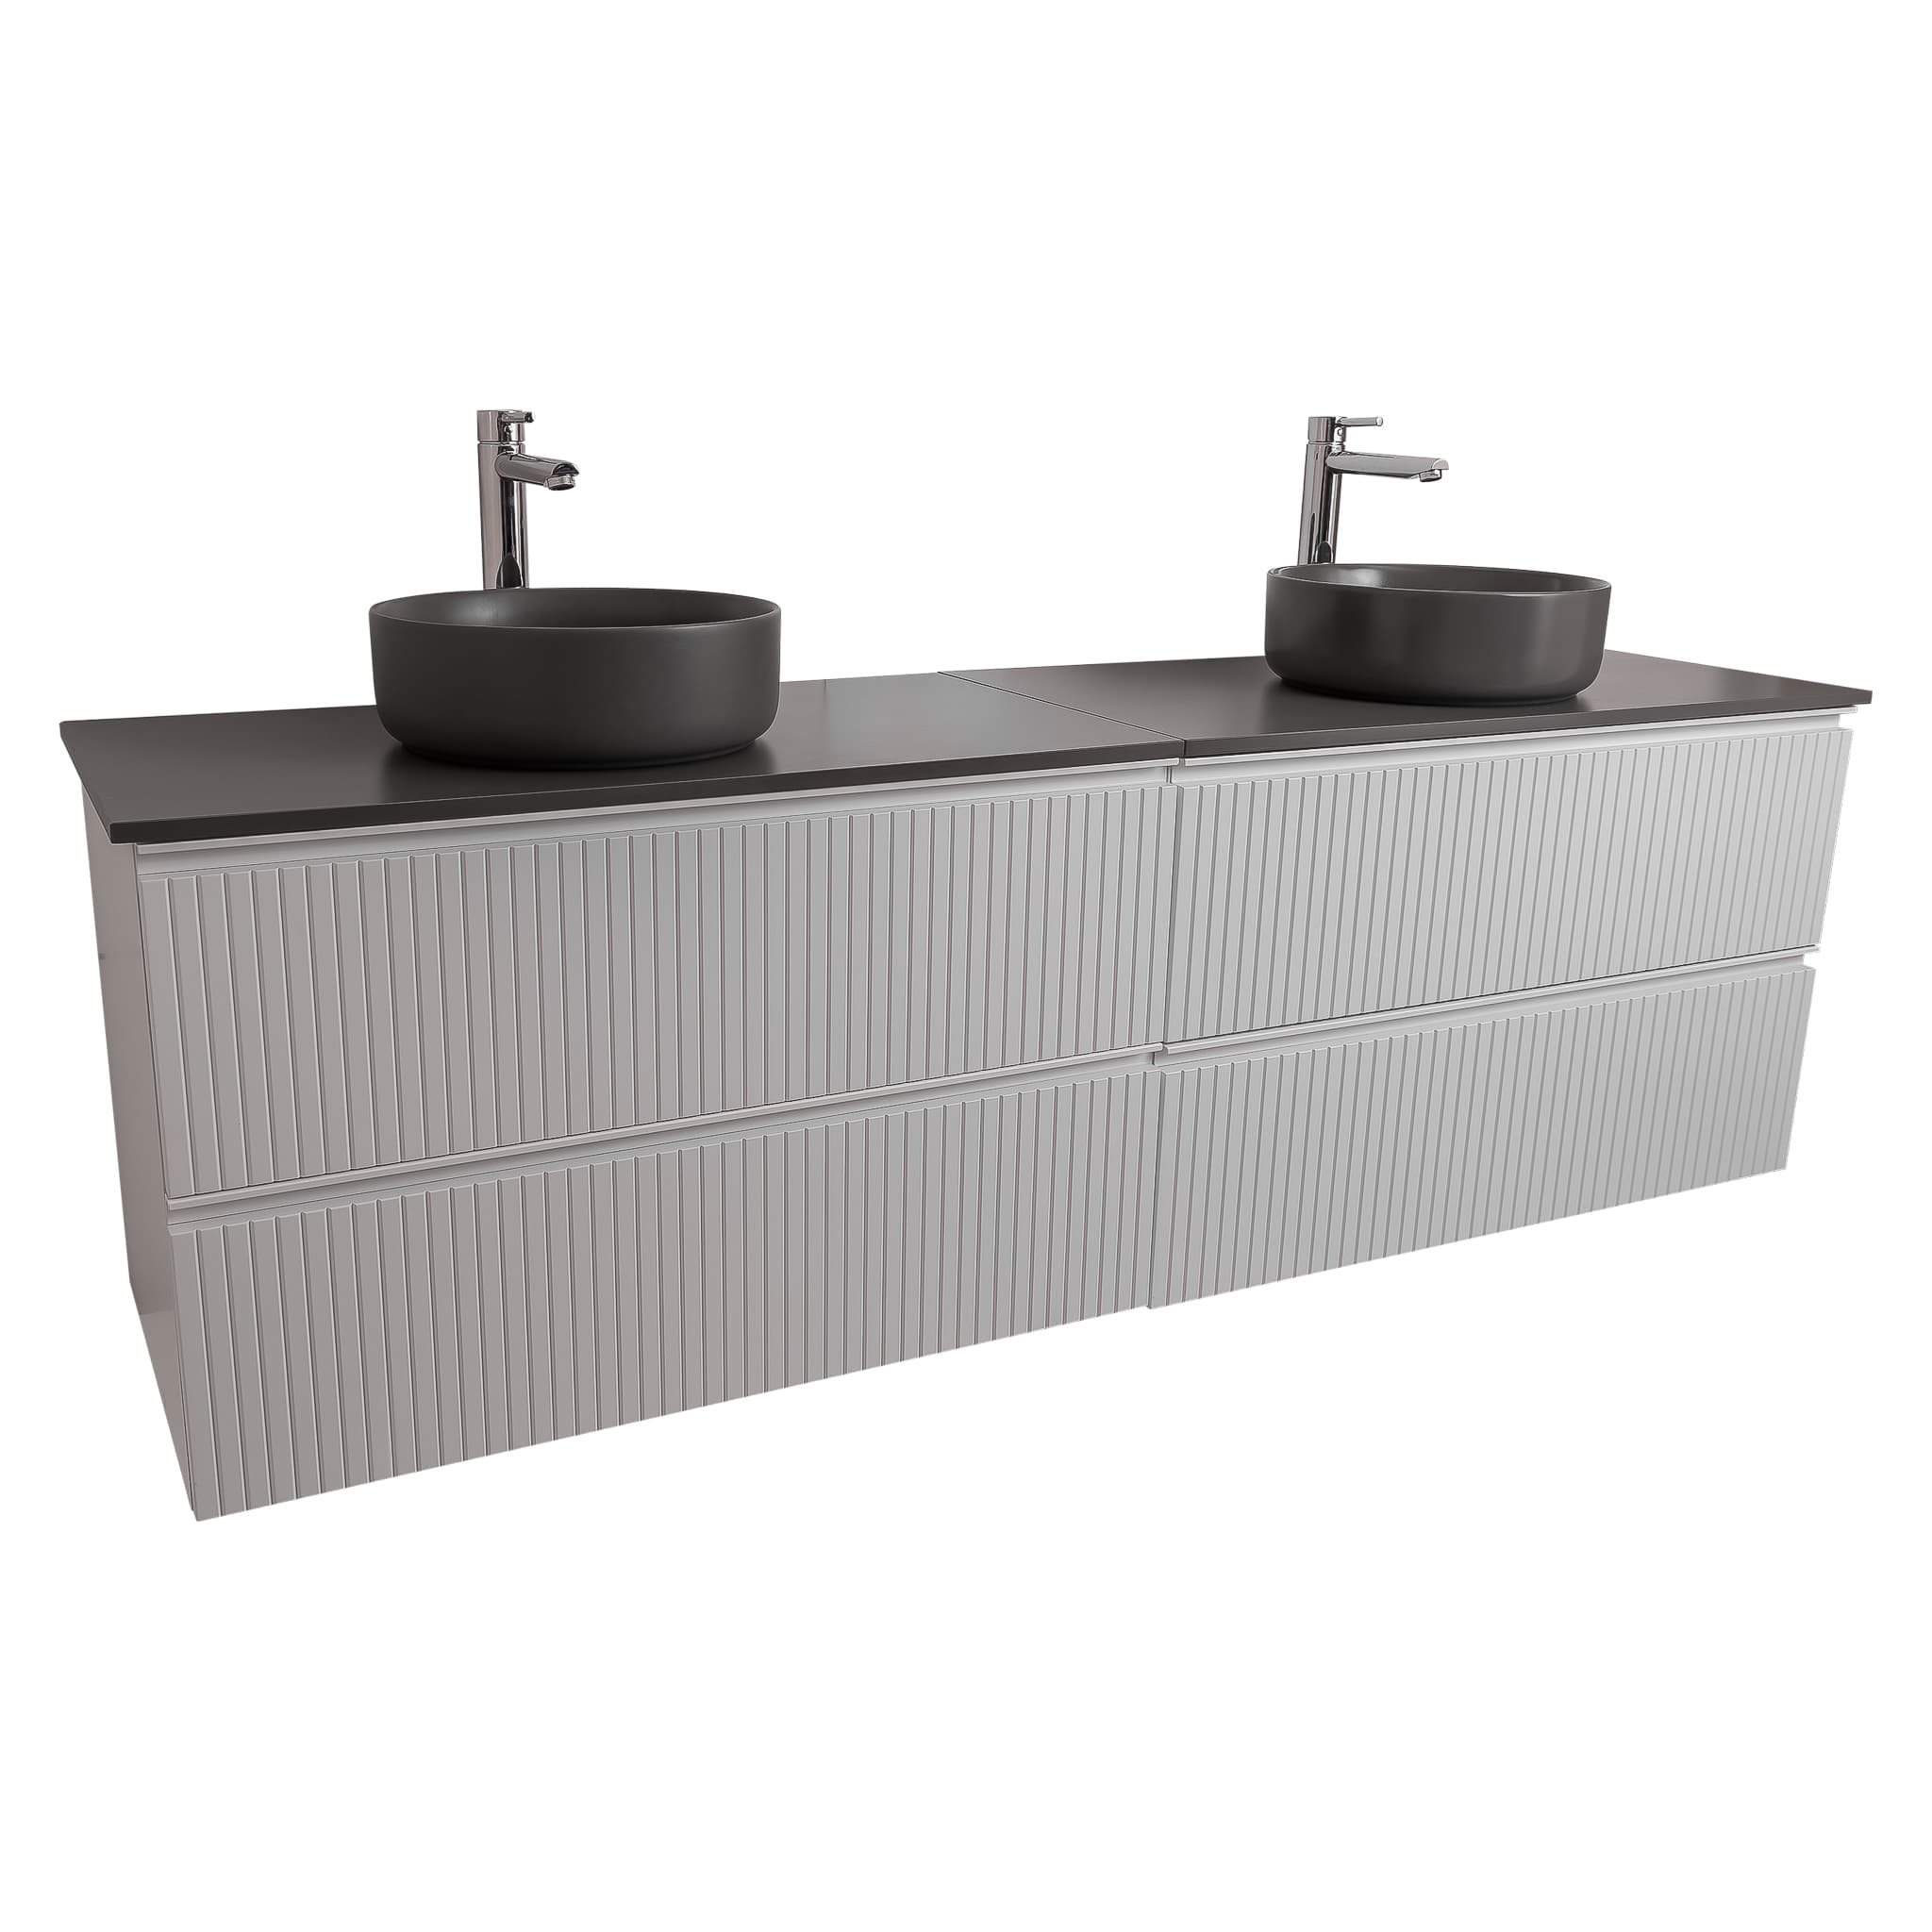 Ares 72 Matte White Cabinet, Ares Grey Ceniza Top And Two Ares Grey Ceniza Ceramic Basin, Wall Mounted Modern Vanity Set